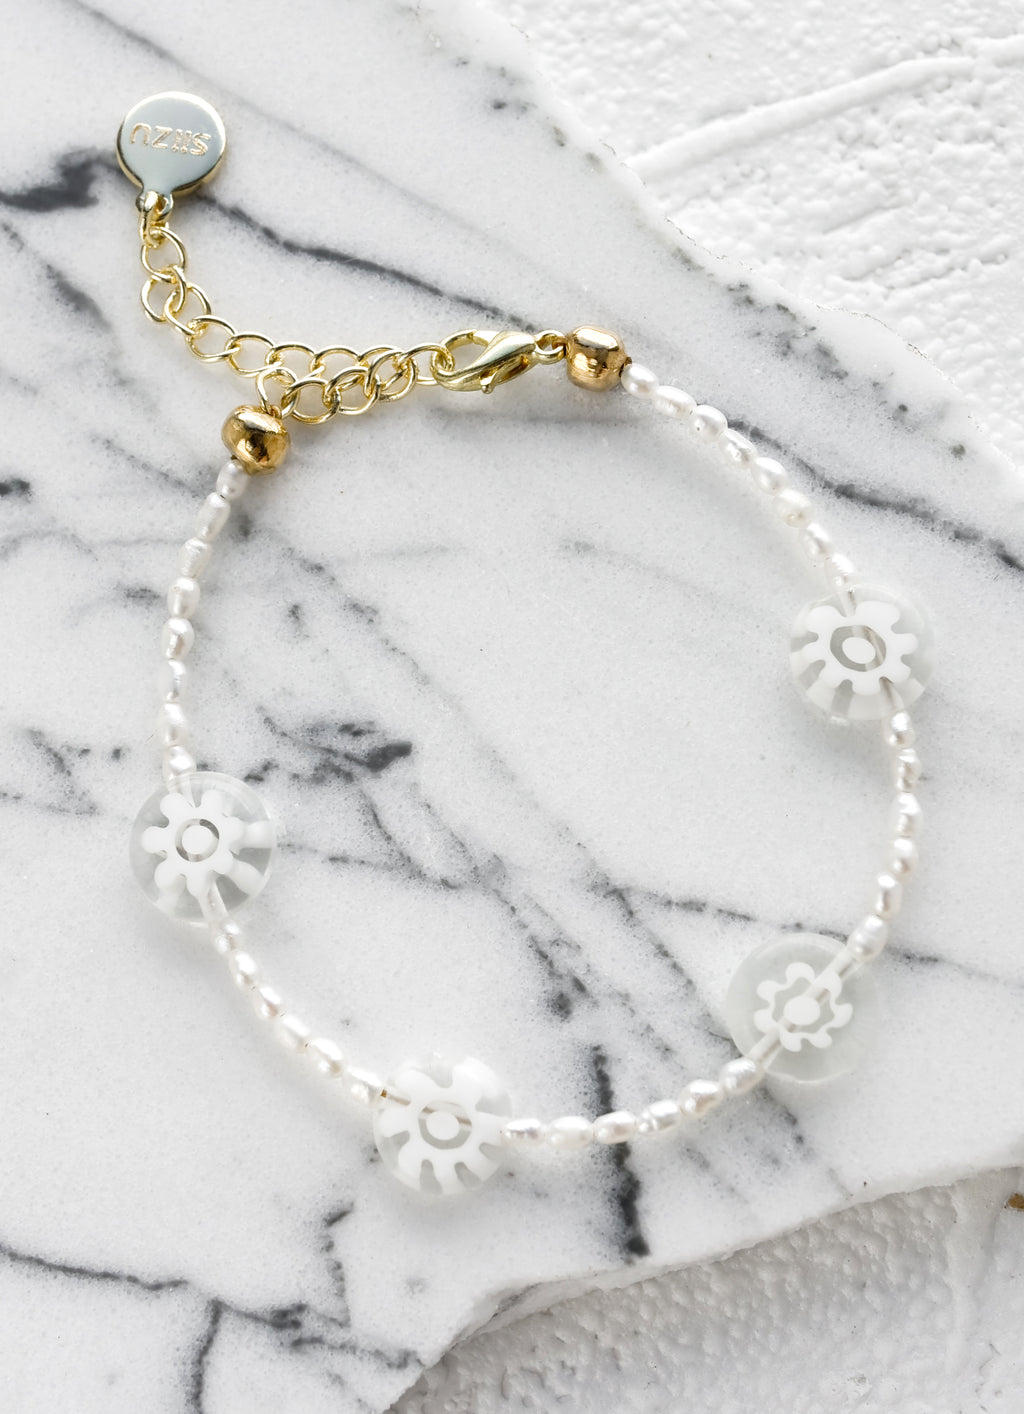 White Flowers: A pearl beaded bracelet with clear millefiore glass daisy beads.